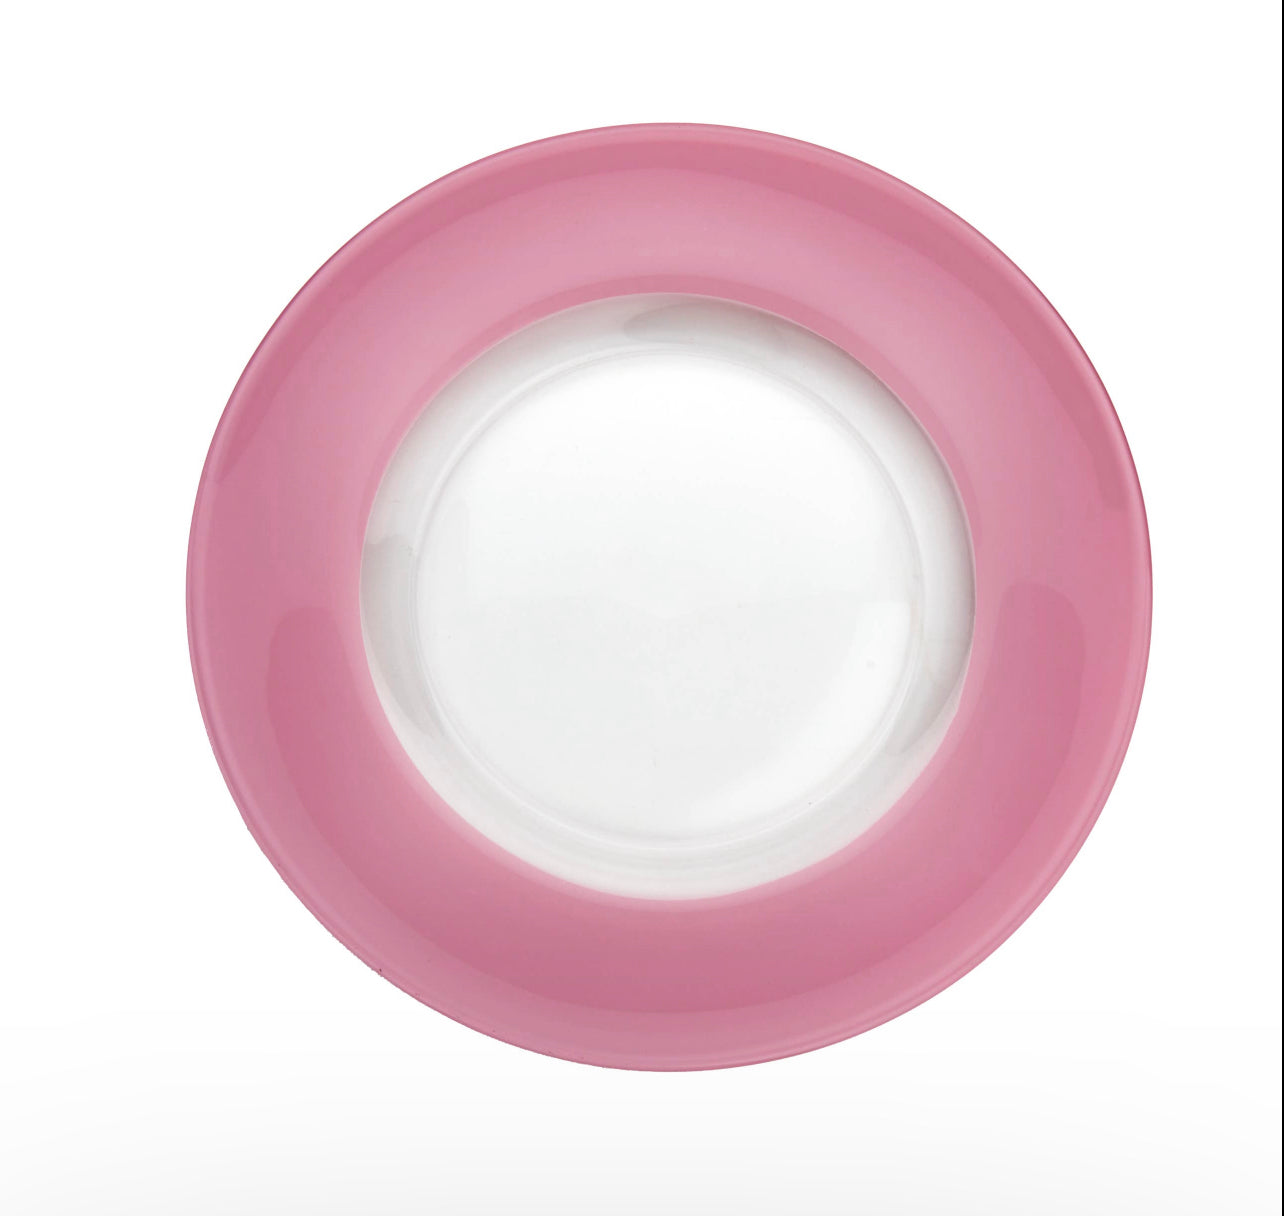 Made Me Blush Charger Plate